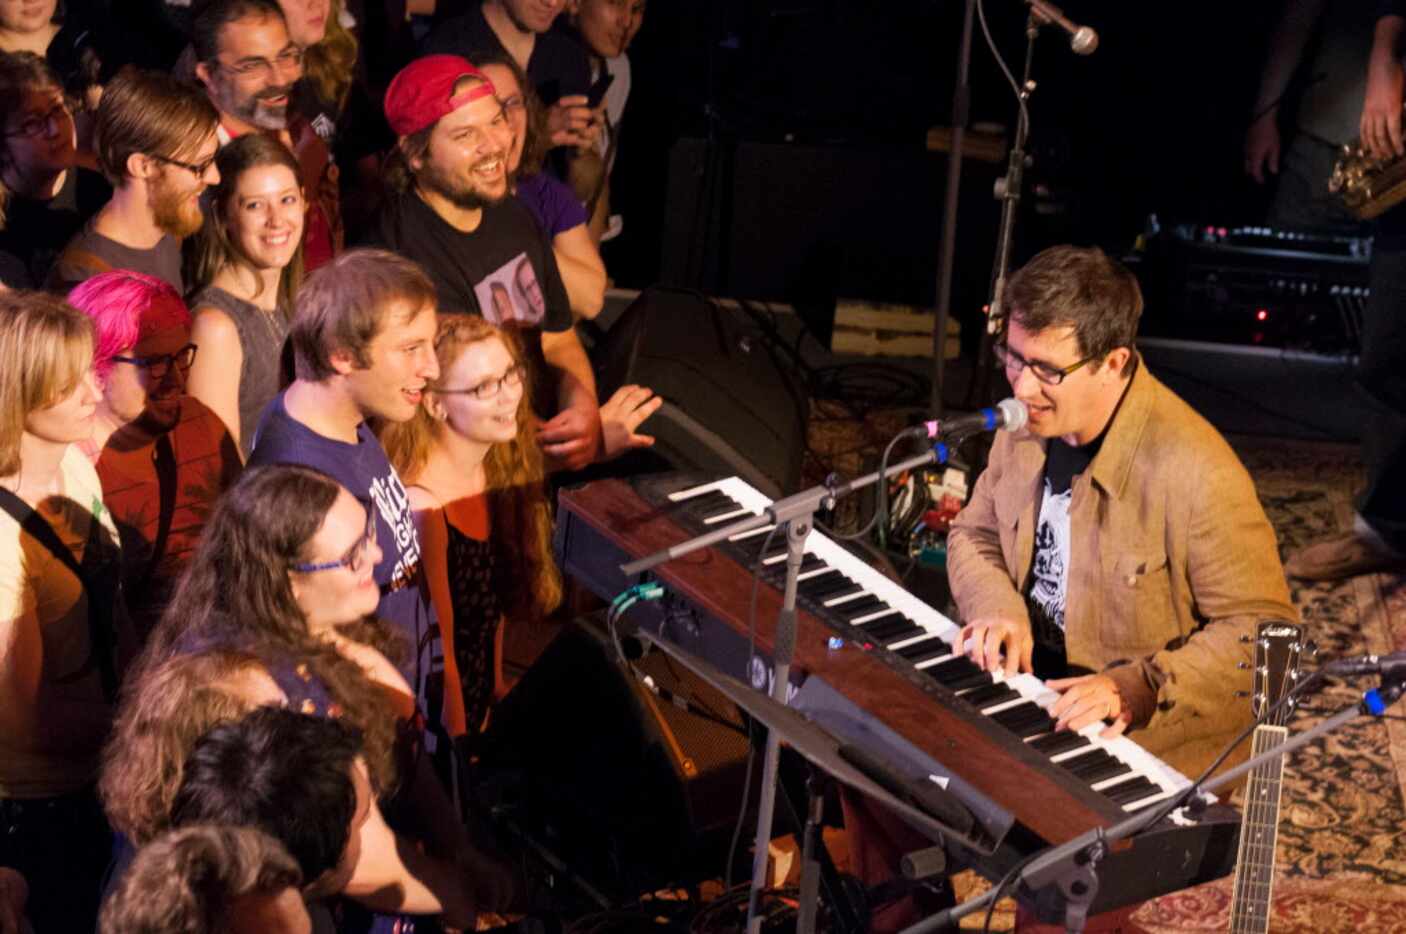 John Darnielle, lead singer of The Mountain Goats, plays the keyboards to a sold out...